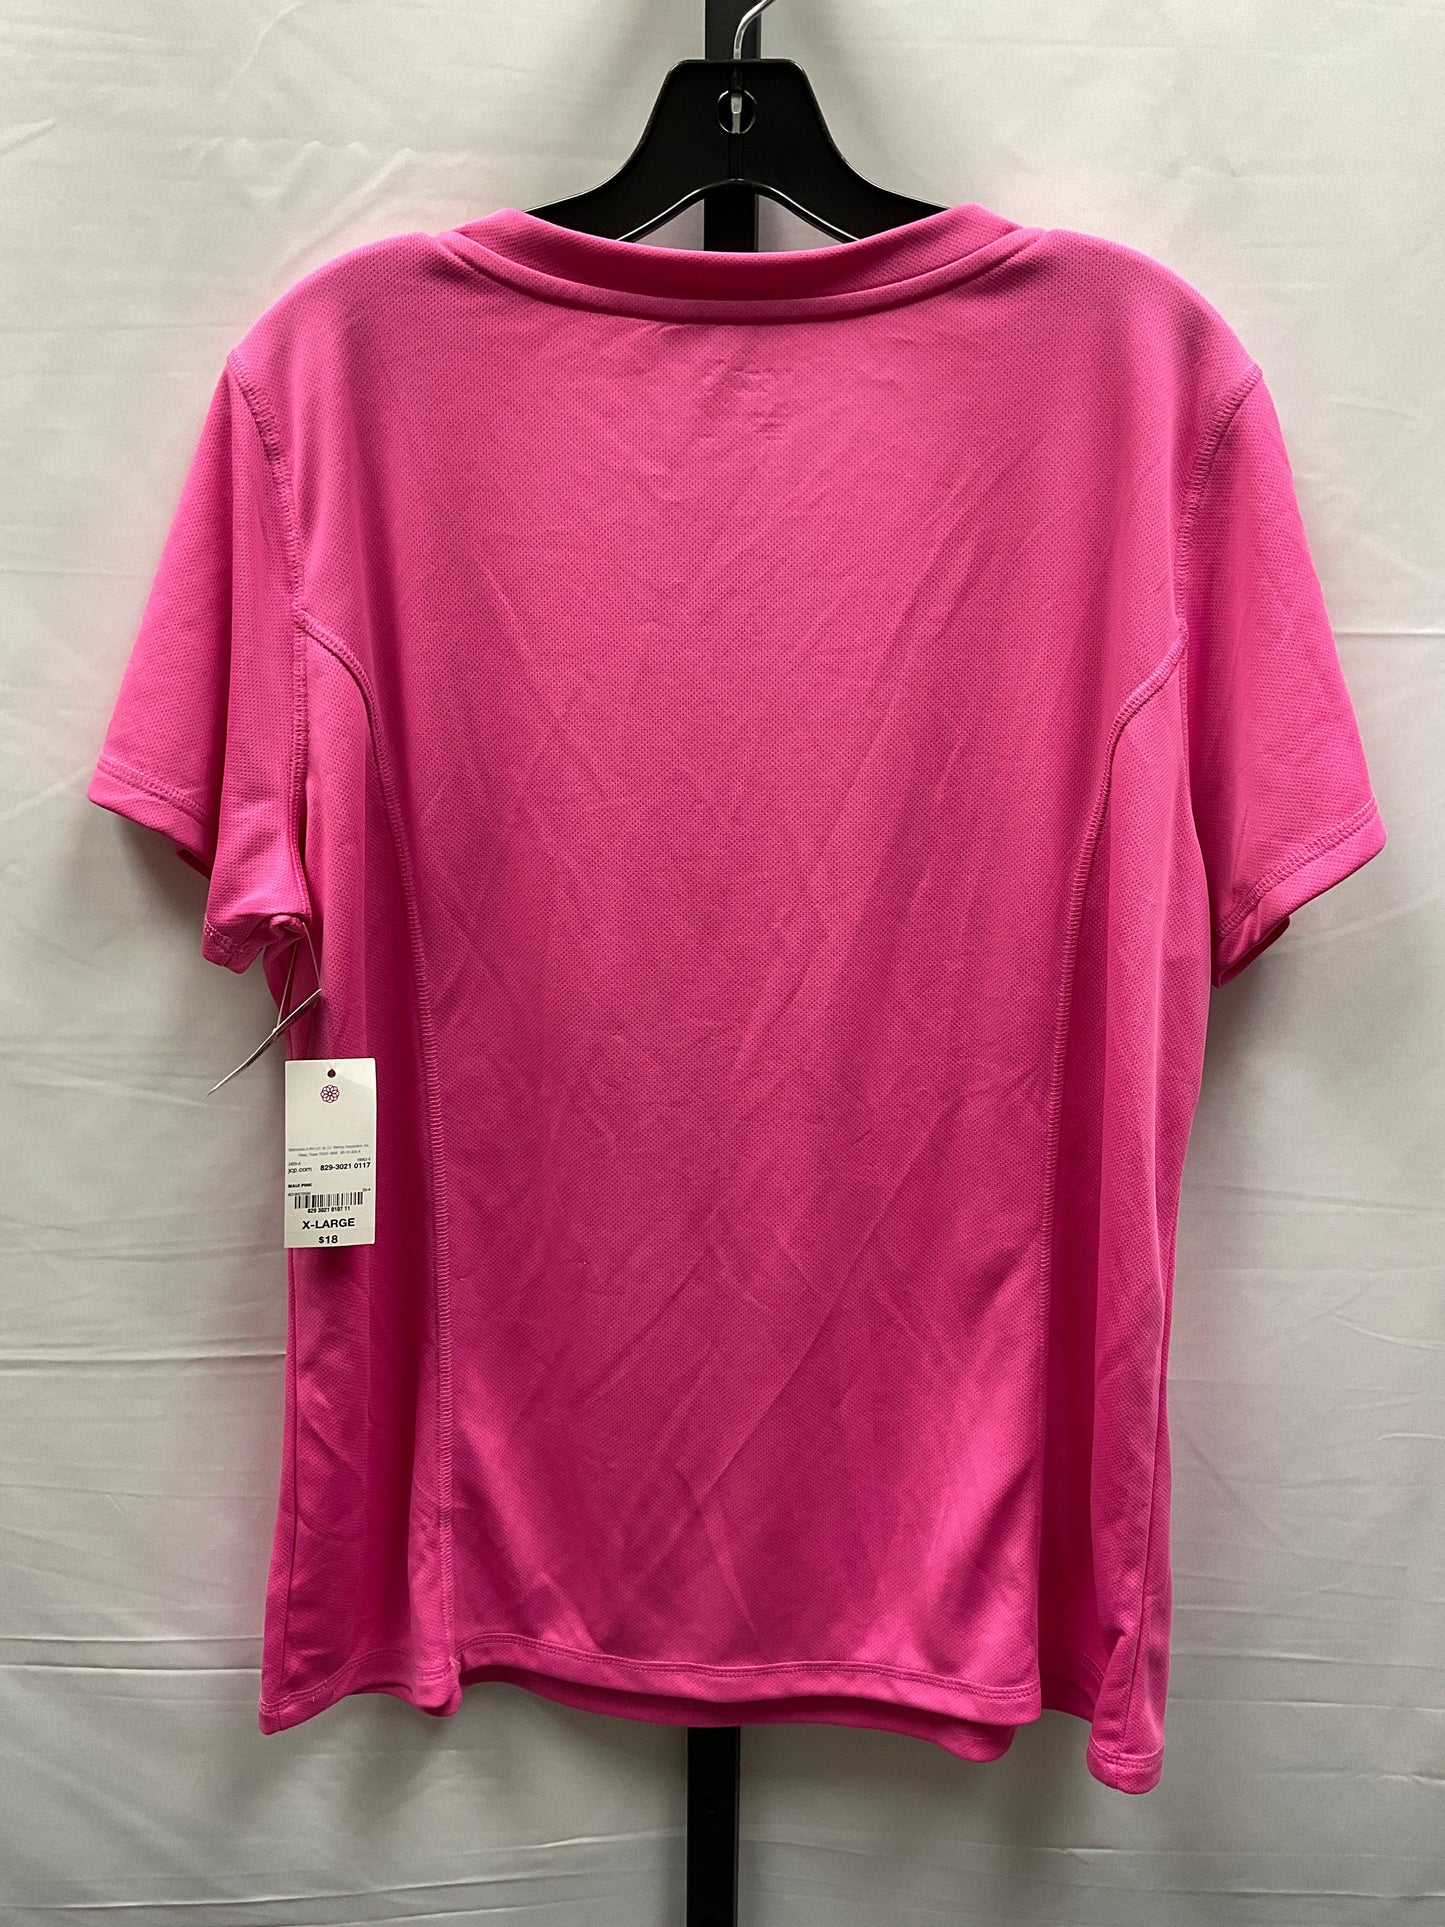 Pink Athletic Top Short Sleeve Made For Life, Size Xl